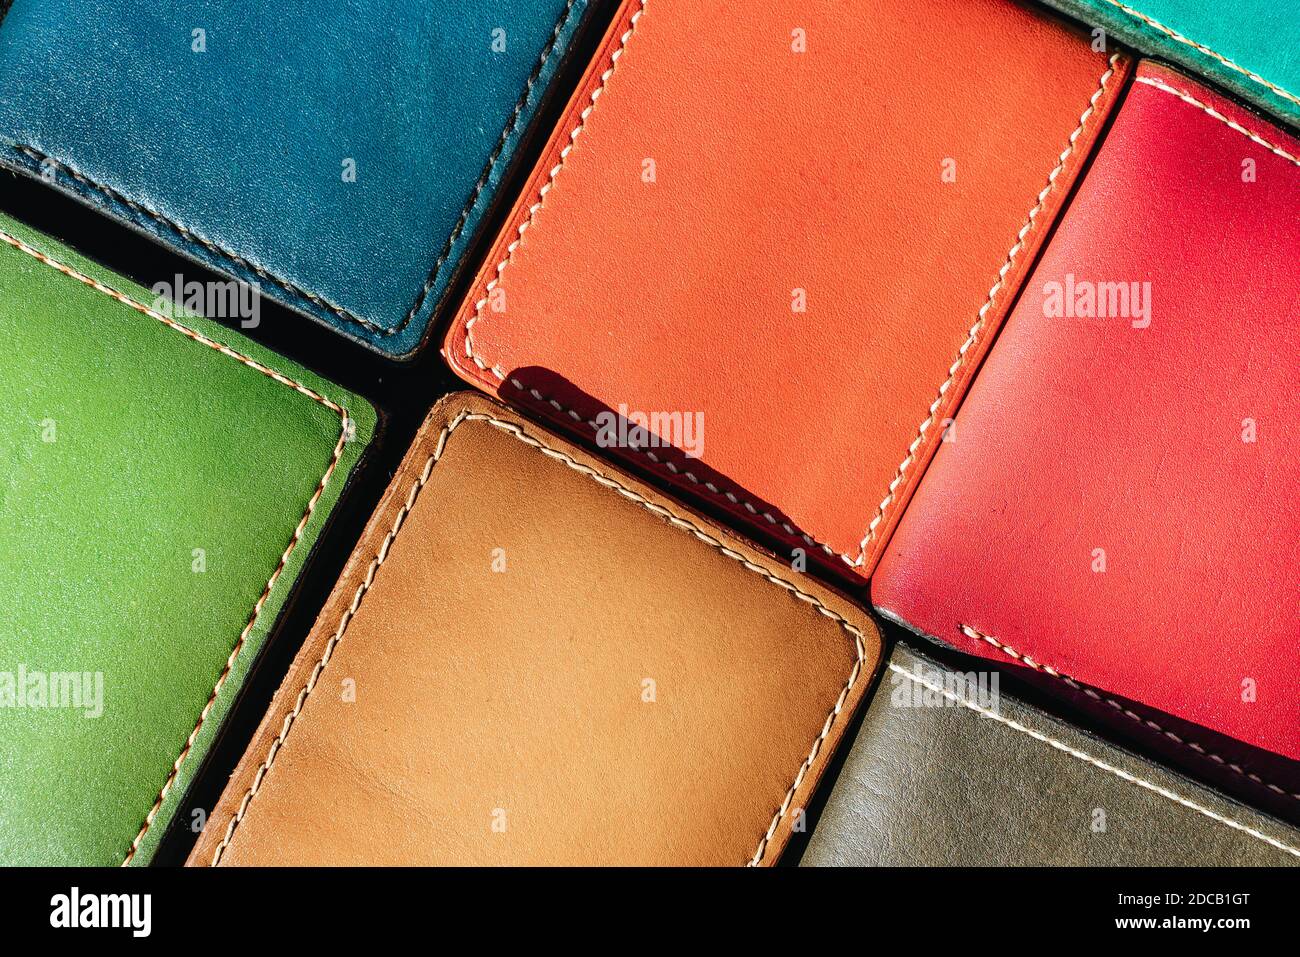 Handmade leather men's wallet. Multi-colored texture. Leather craft ...